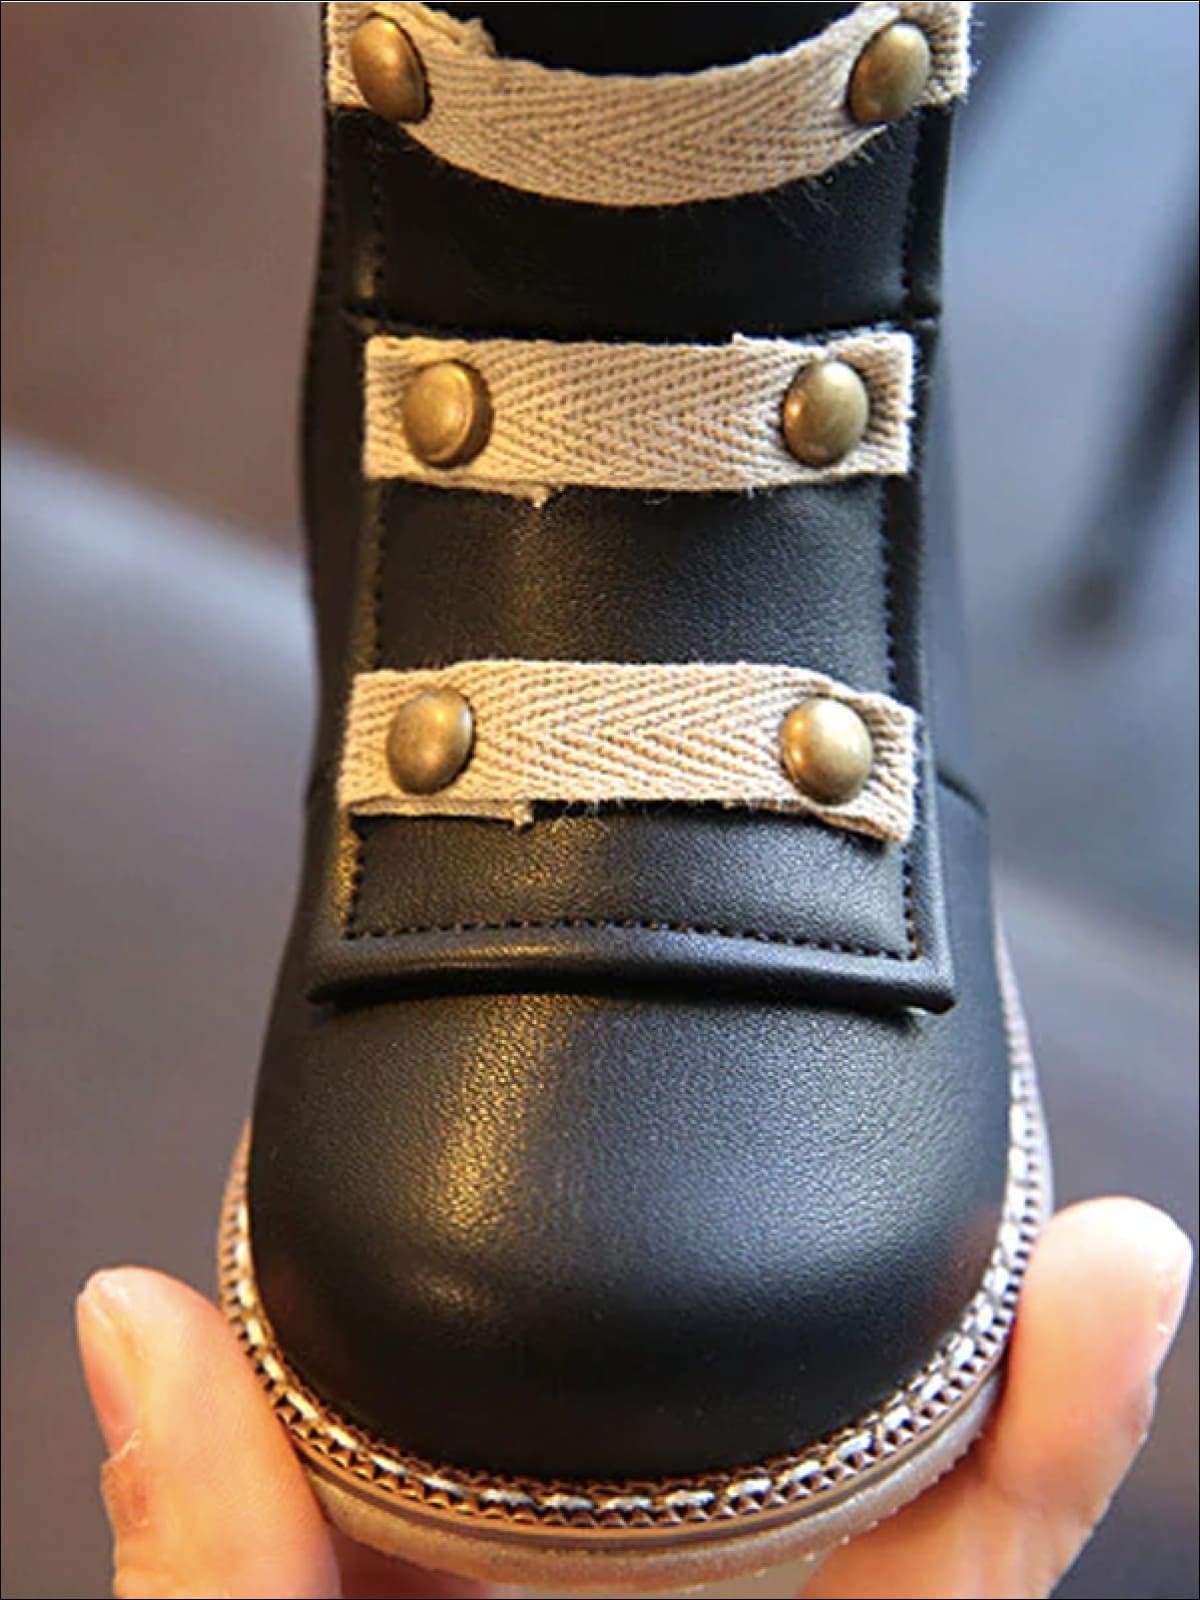 Dior Buckle Military Combat Boot